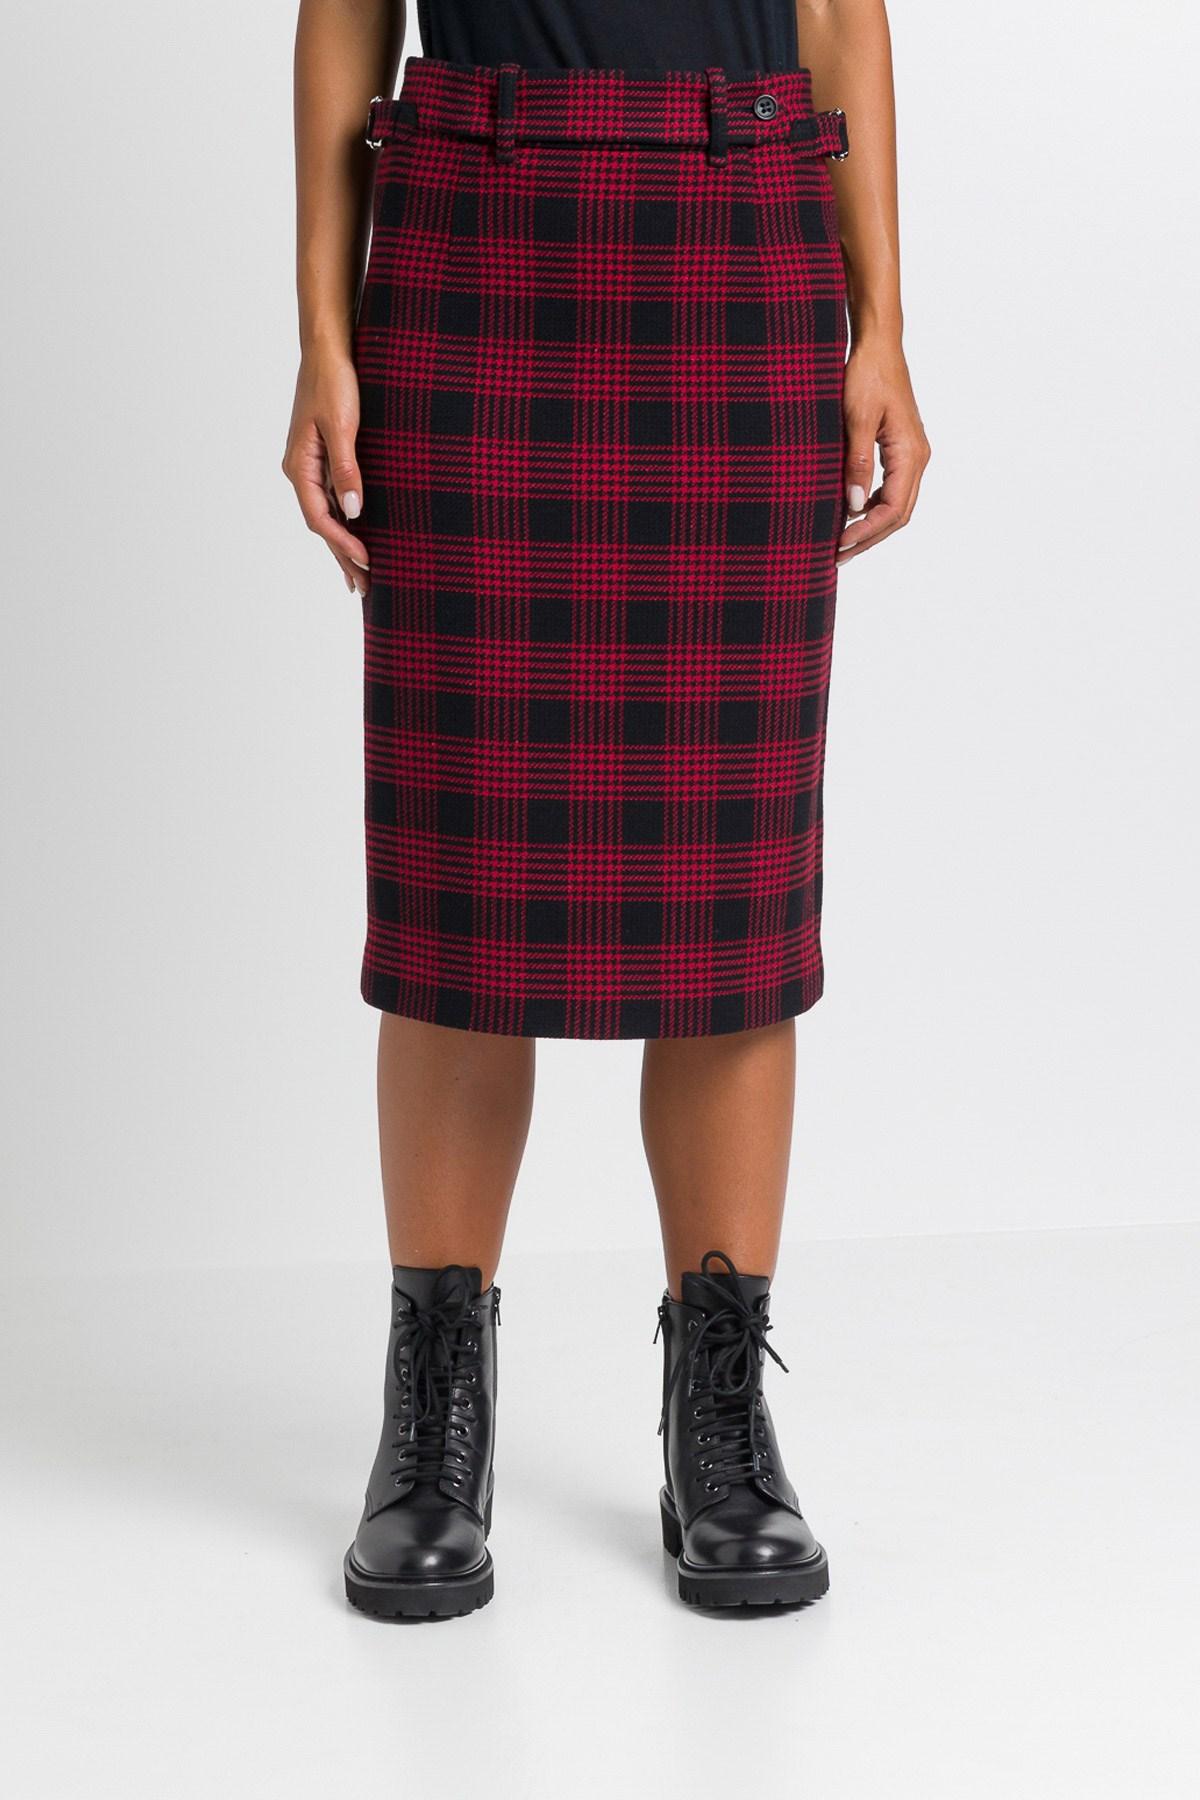 RED Valentino Check Midi Skirt in Red - Lyst